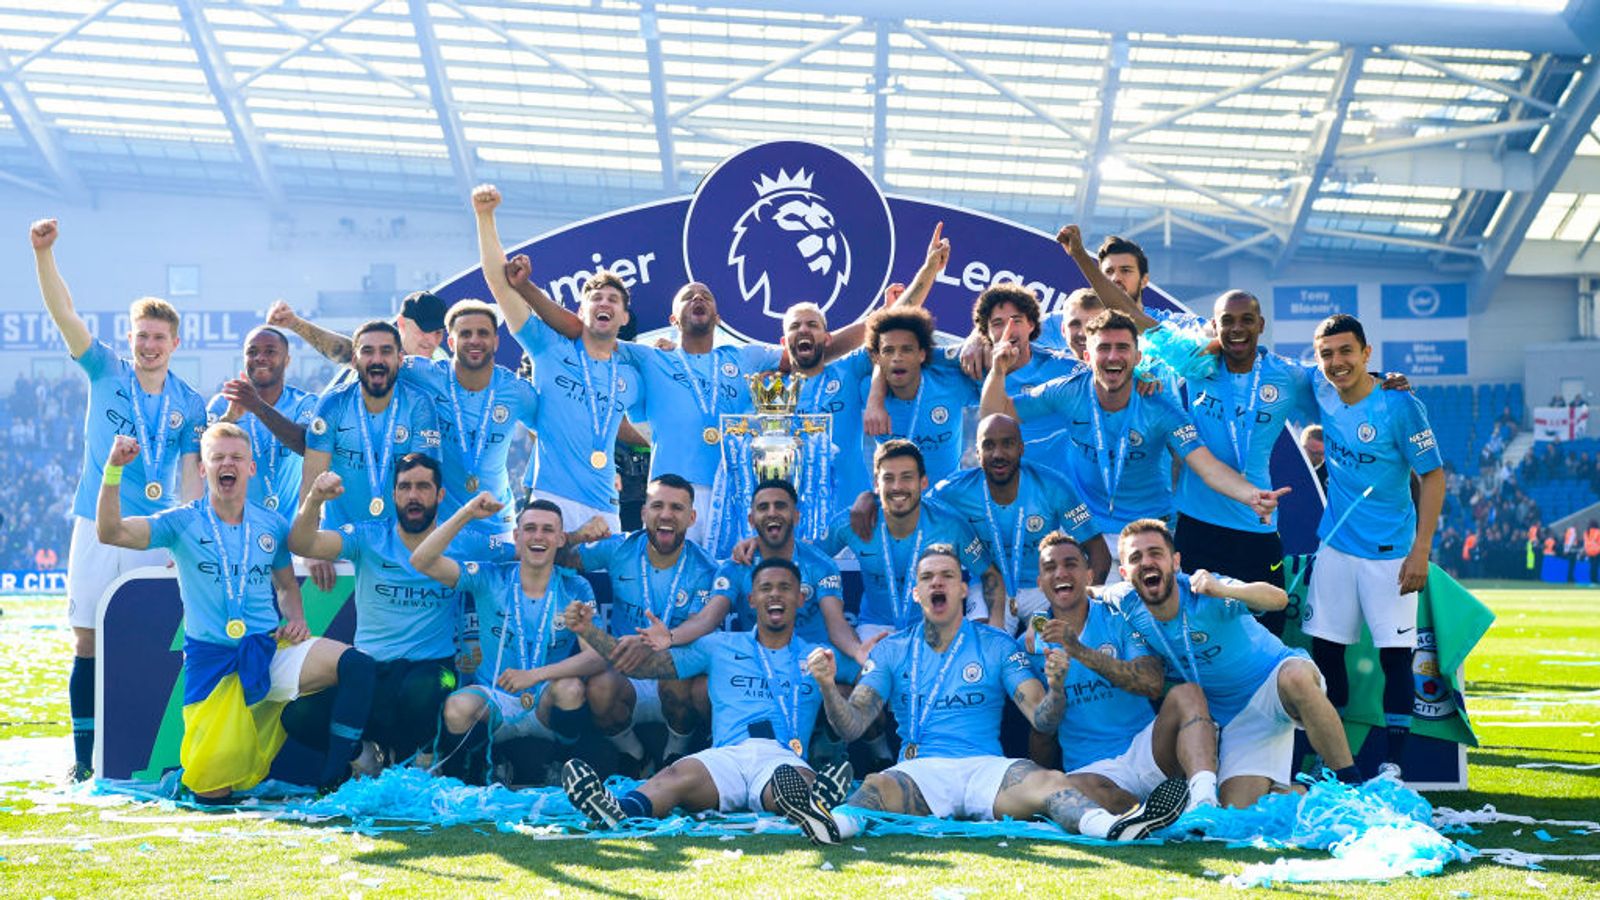 We're teaming up with top football club Manchester City